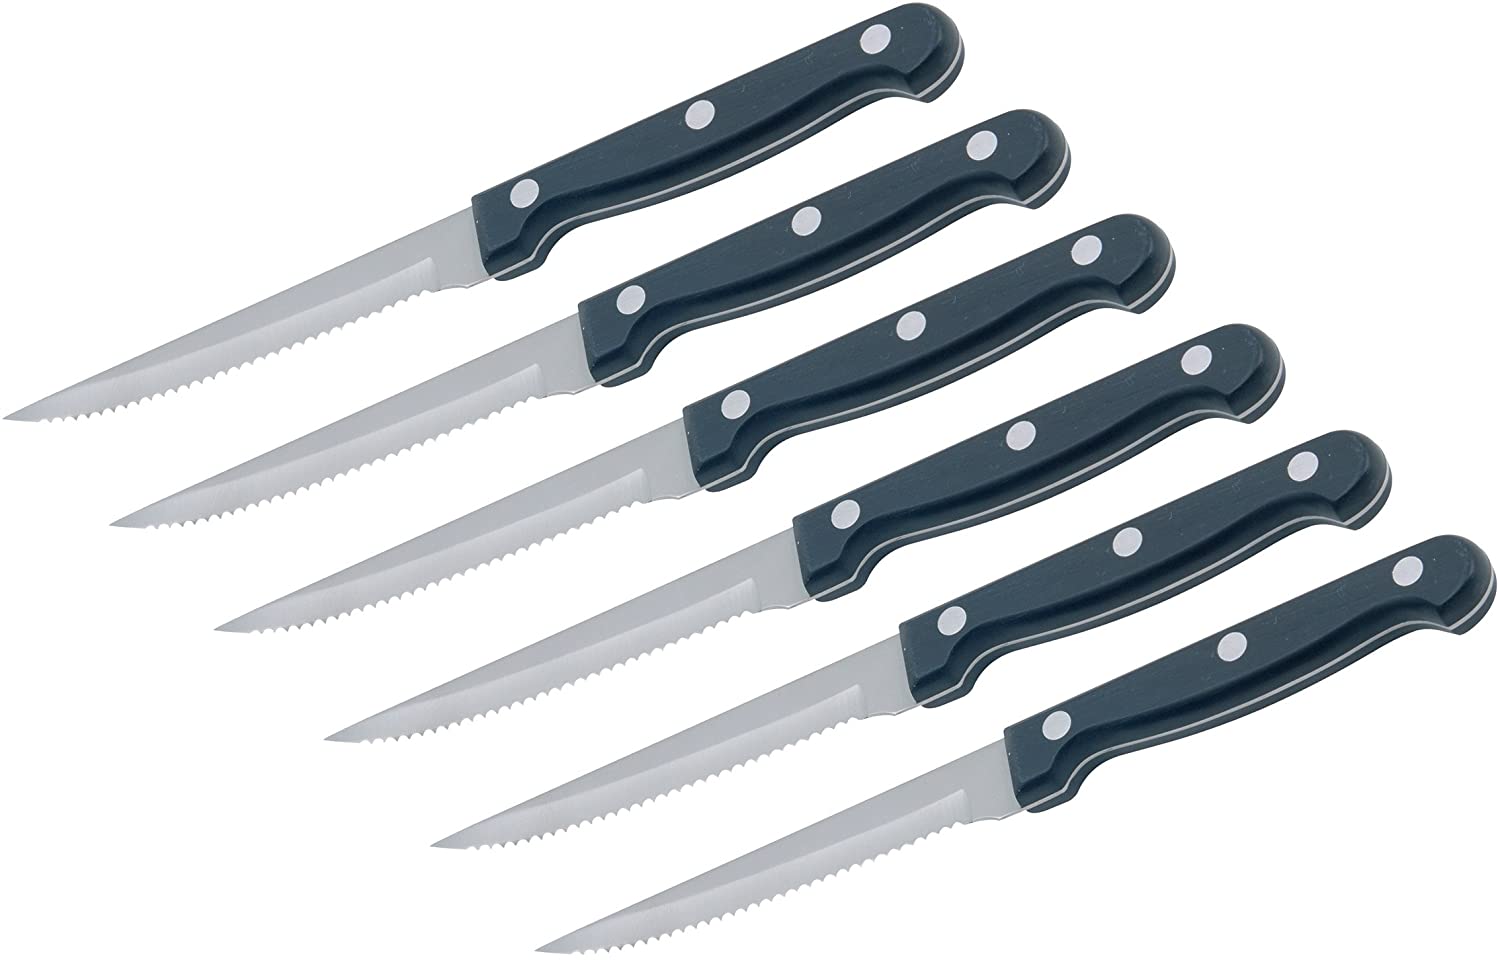 KitchenCraft Stainless Steel Steak Knives in Gift Box 22cm Set of 6